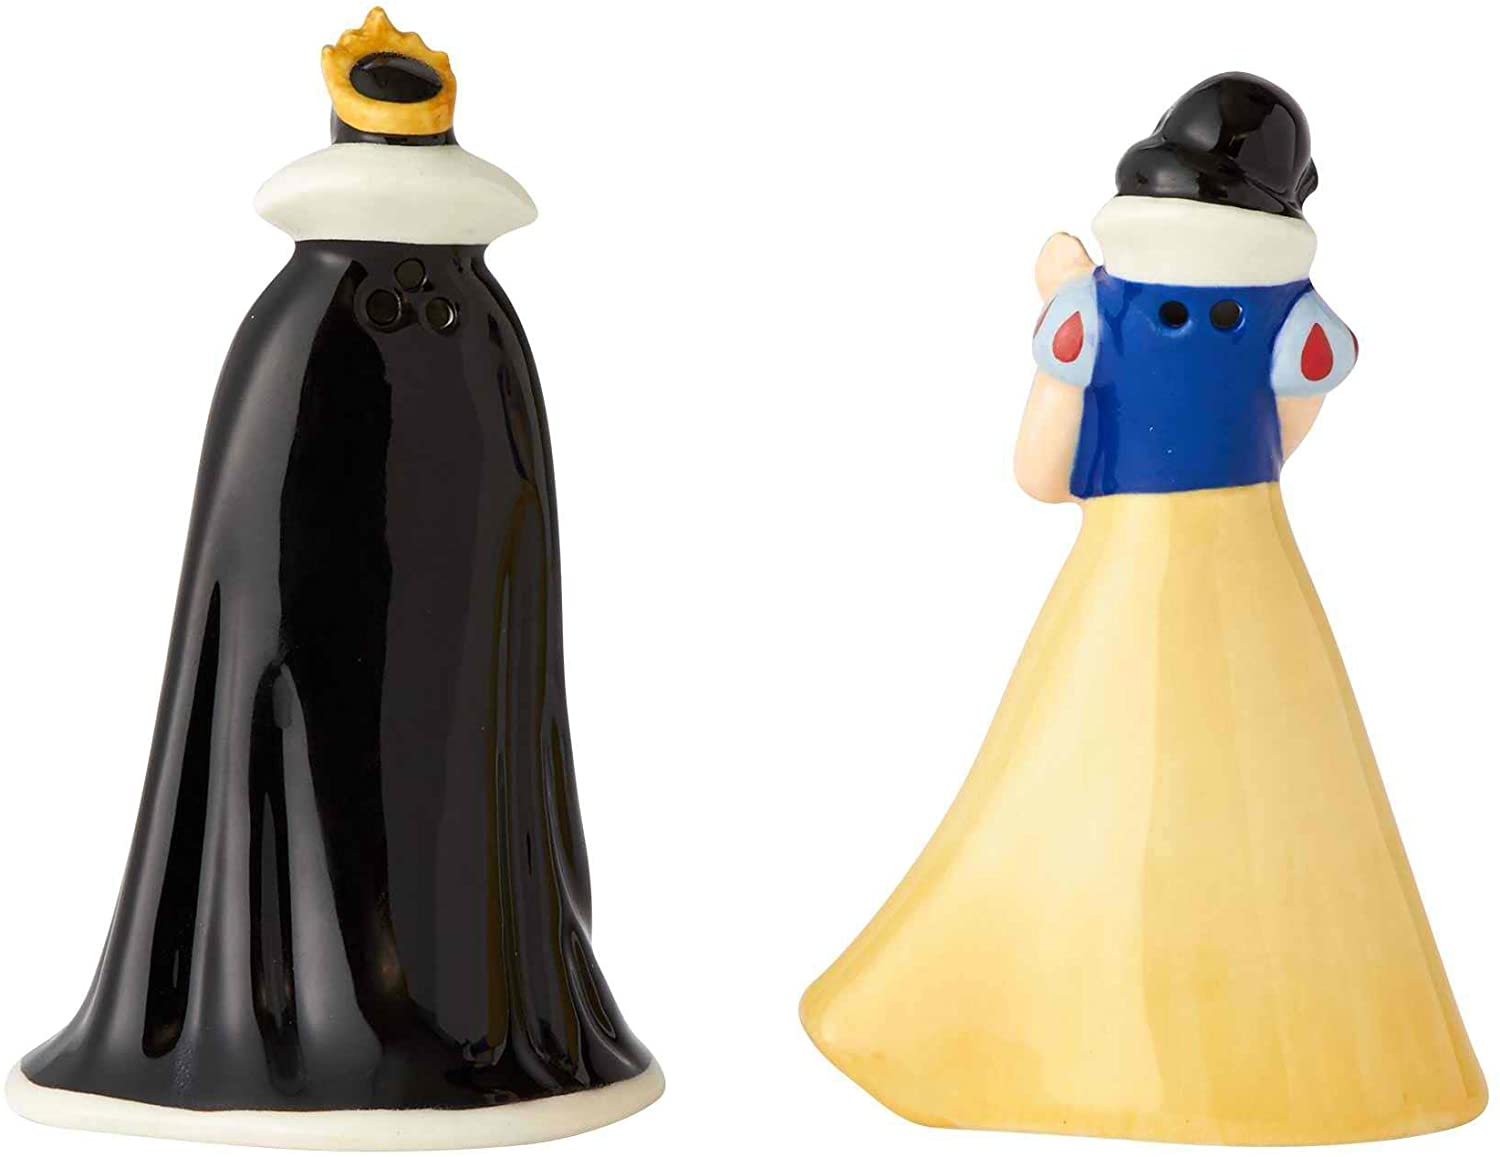 Disney's Snow White and Evil Queen Salt and Pepper Shakers